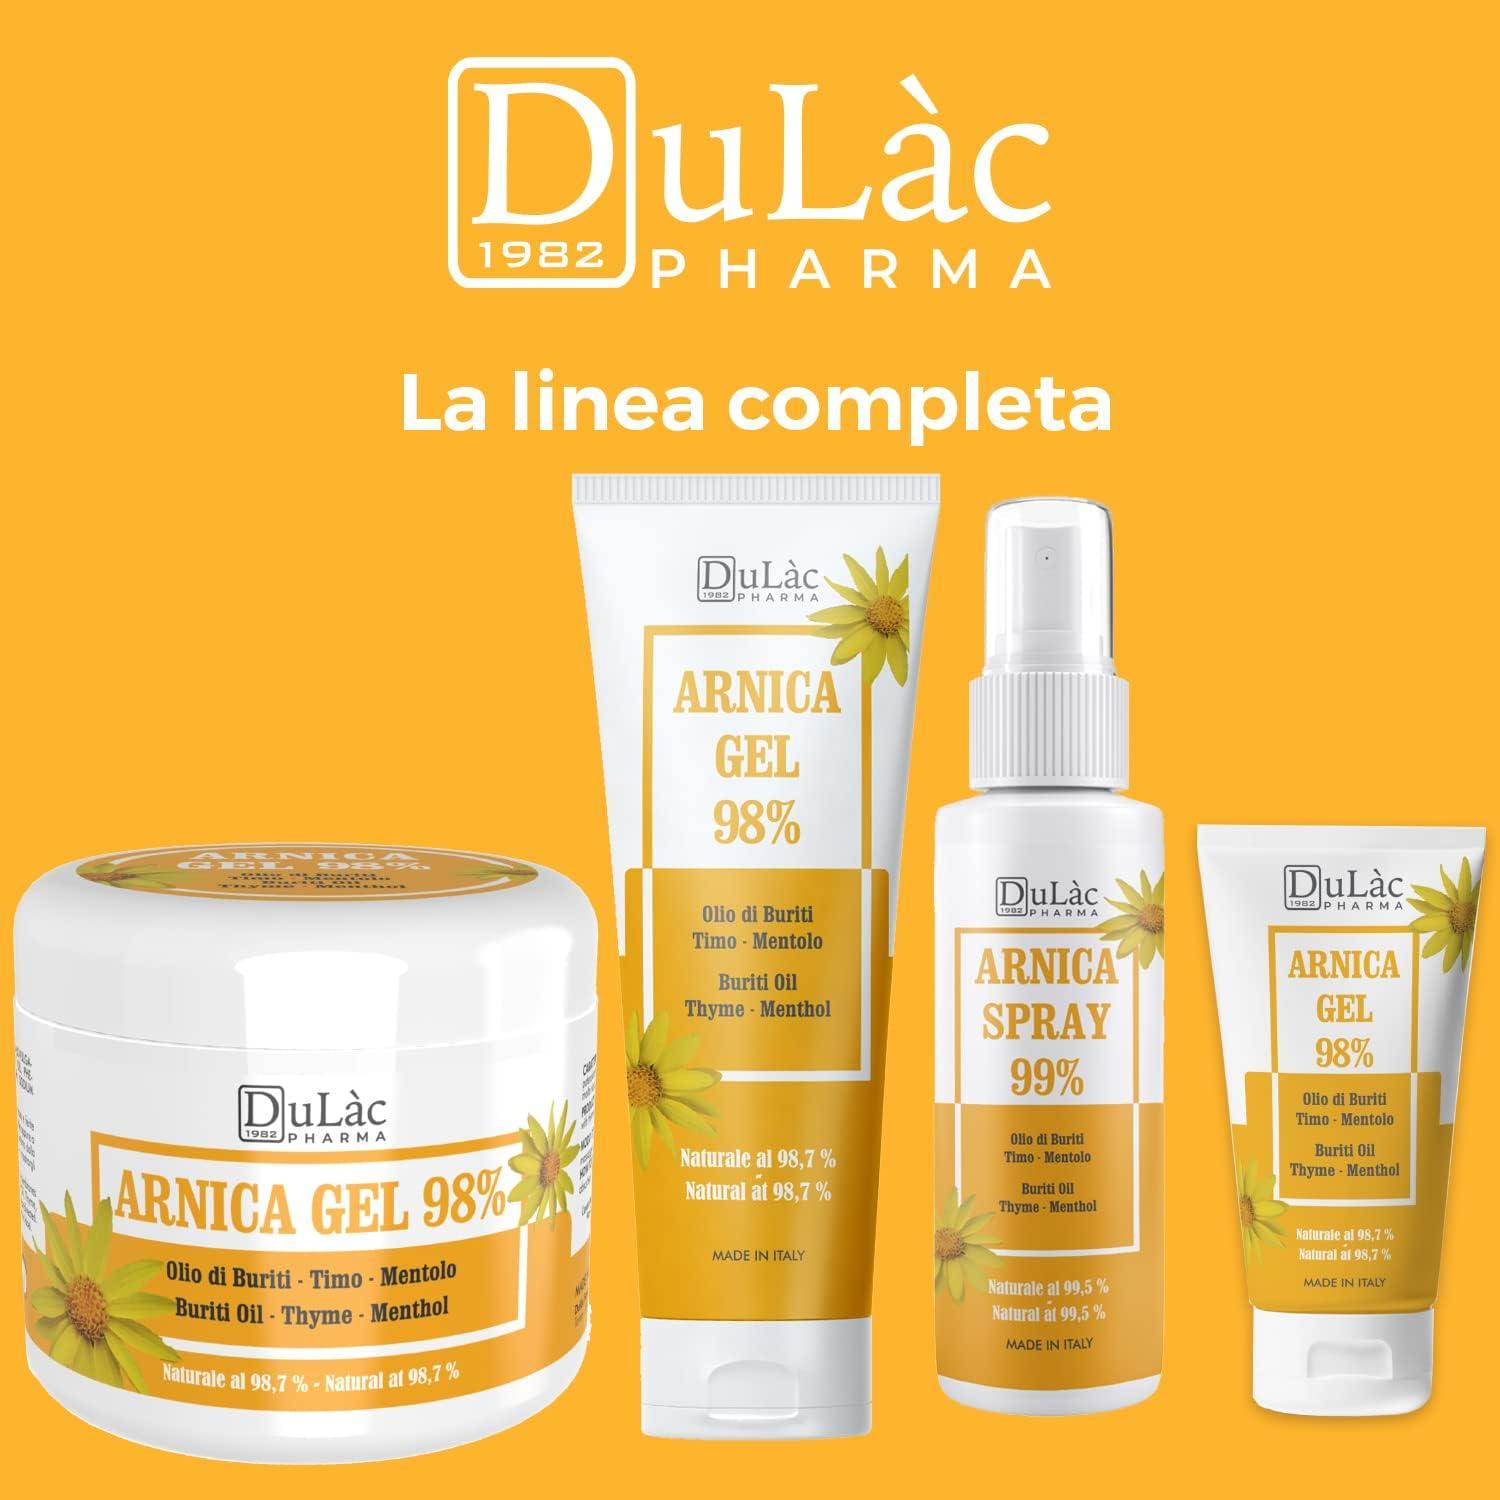 Dulàc Arnica Gel for Bruising and Swelling Maximum Strength (98%) 3.38 Fl  Oz for Muscle and Joint Relief, Cool Effect and Natural Formula